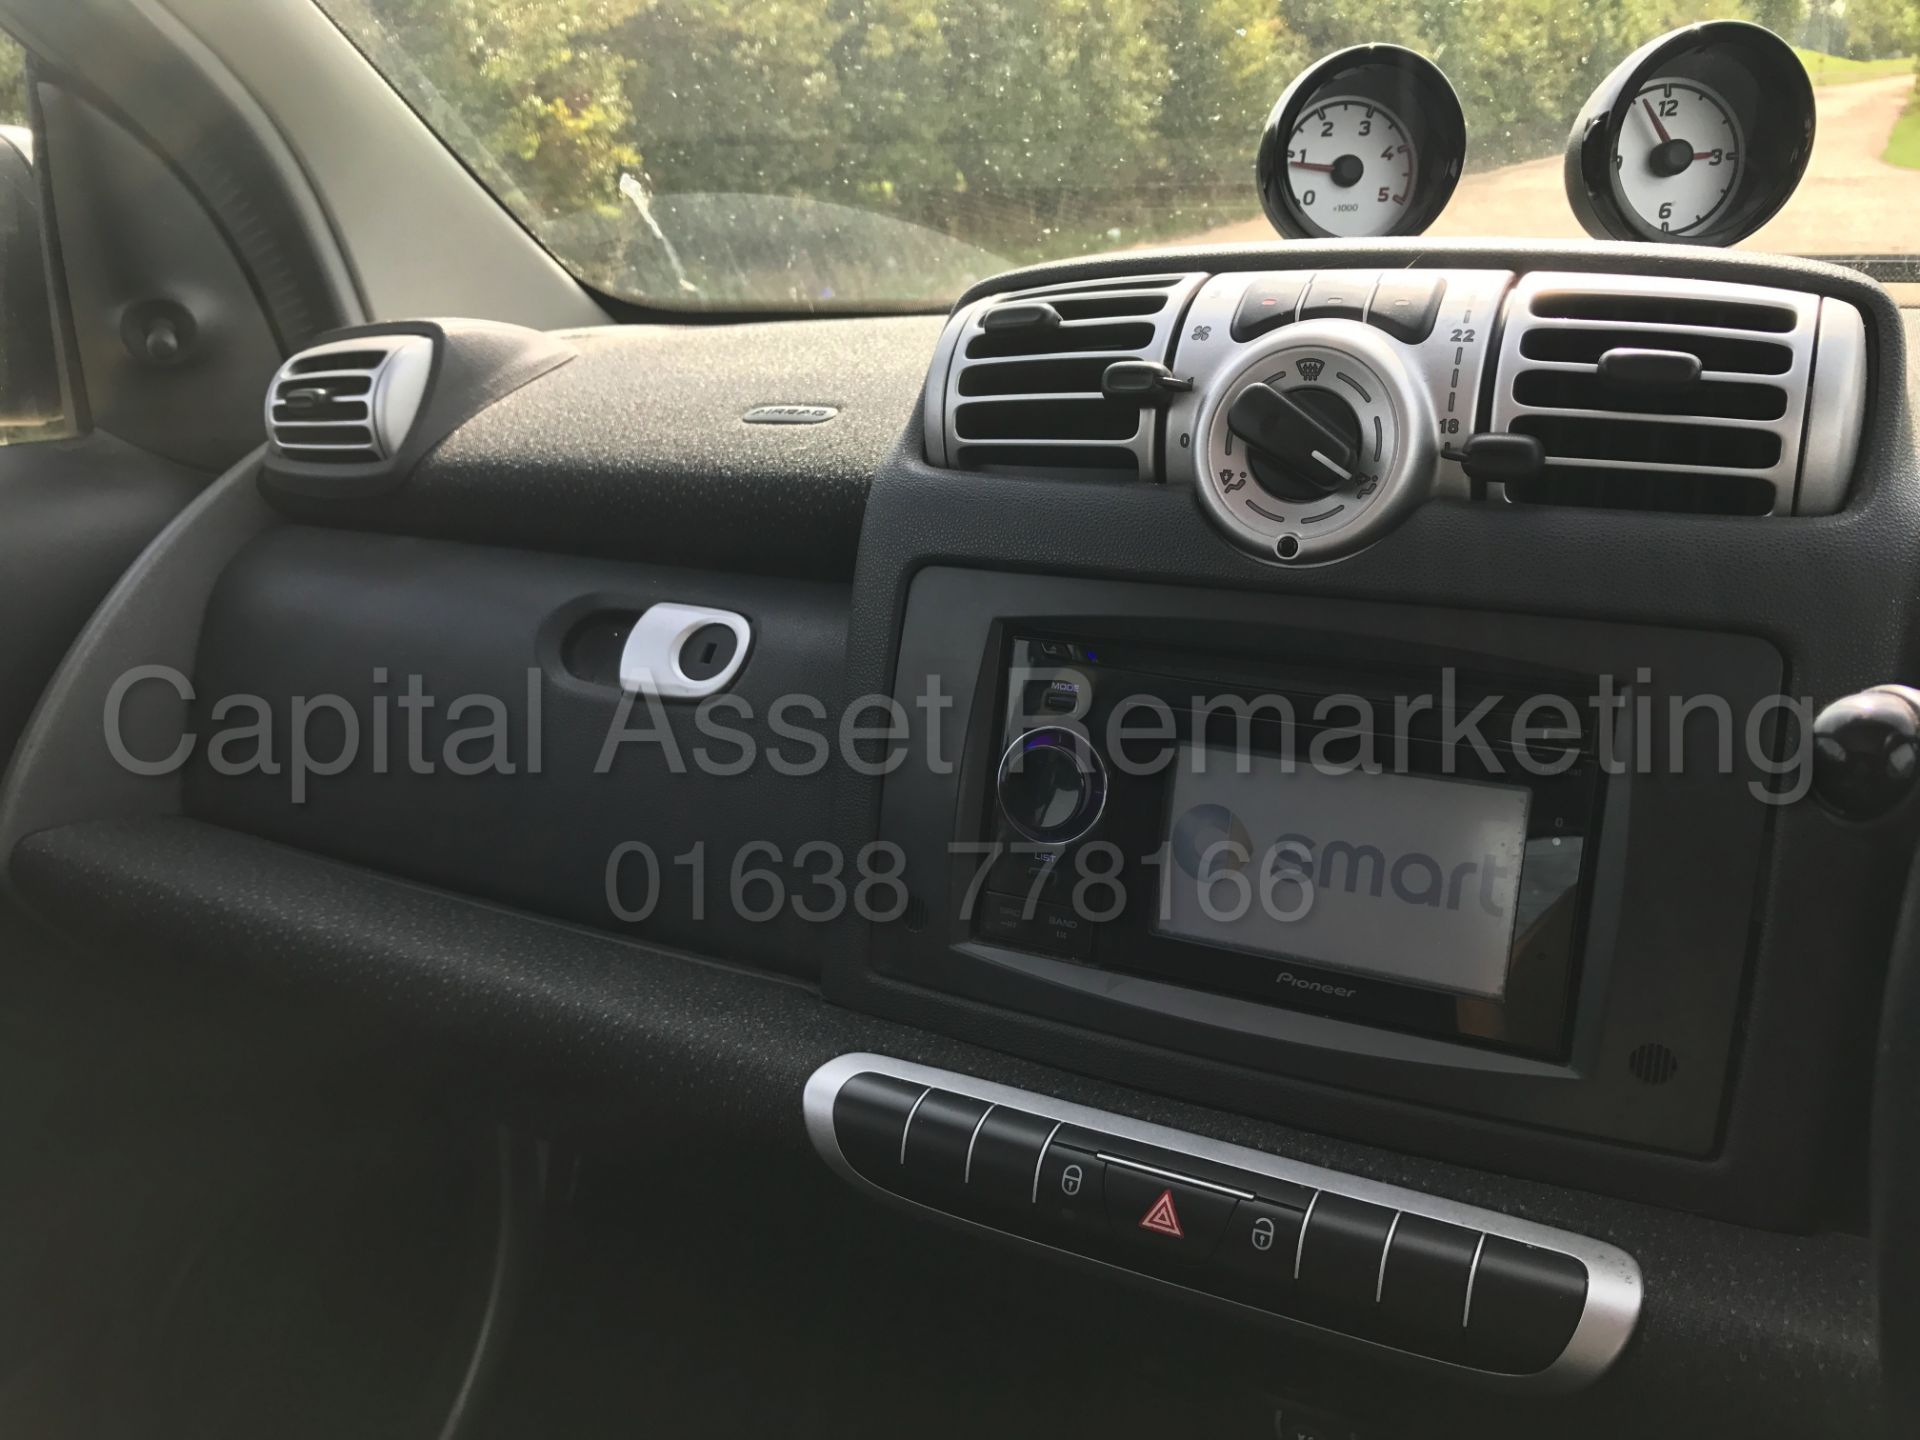 (On Sale) SMART FORTWO 'PASSION' (2011 - 11 REG) 'CDI - DIESEL - AUTO - AIR CON - PAN ROOF' (70 MPG) - Image 20 of 24